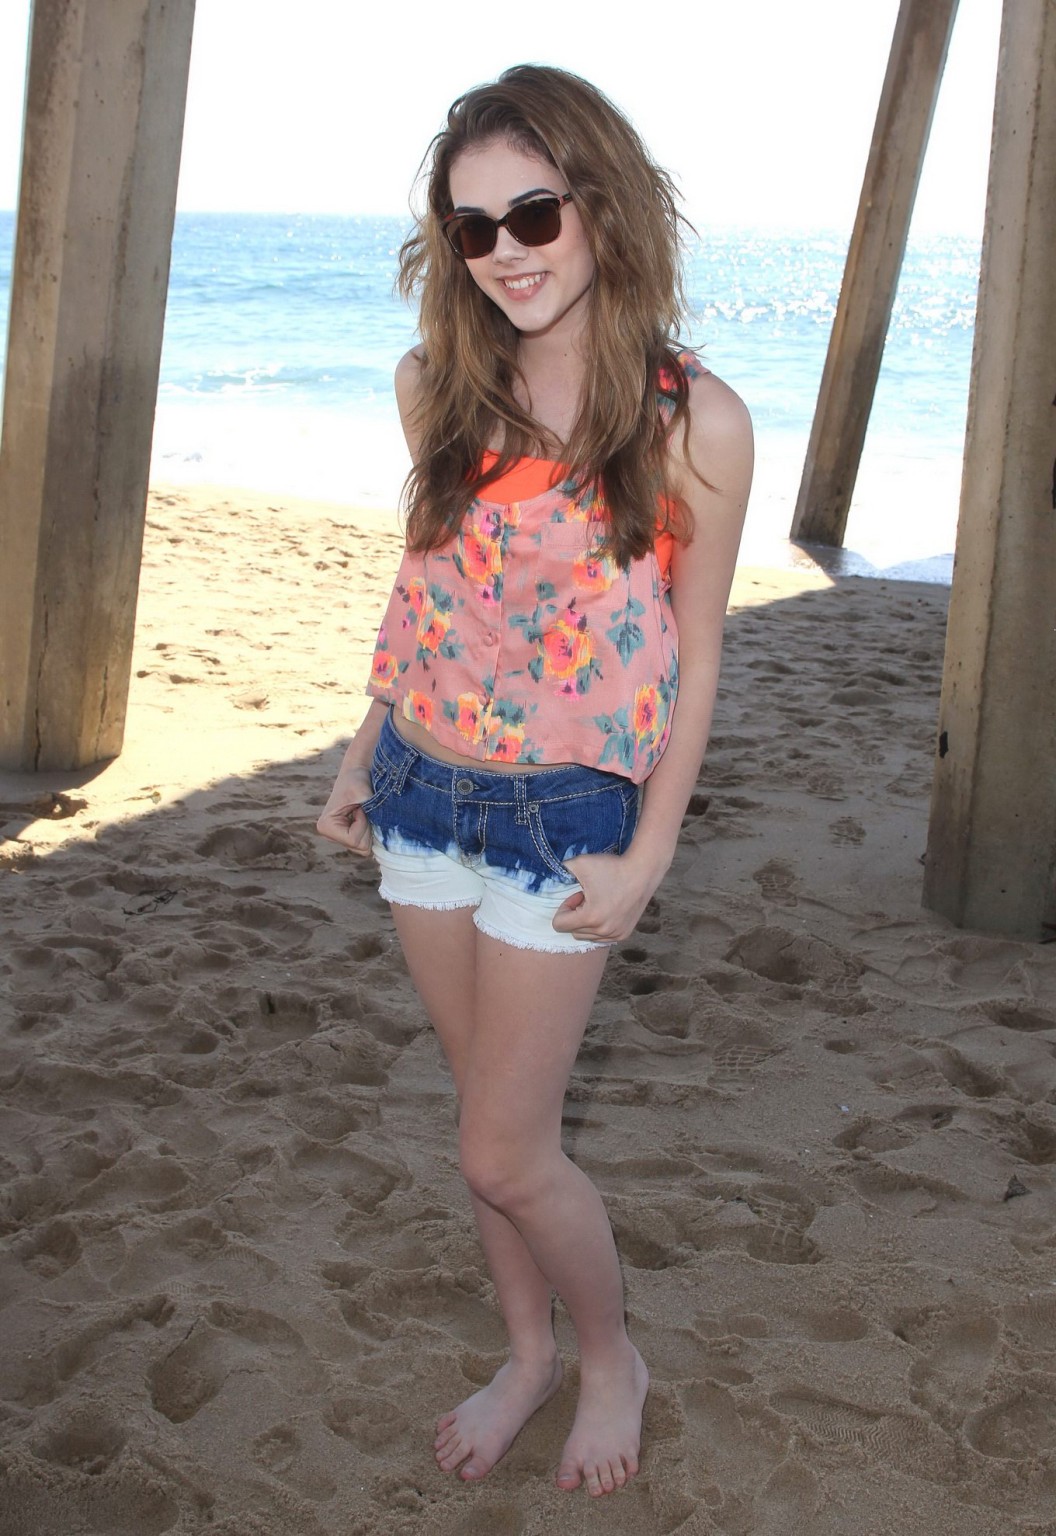 McKaley Miller wearing skimpy top and denim shorts at the beach in Los Angeles #75194299